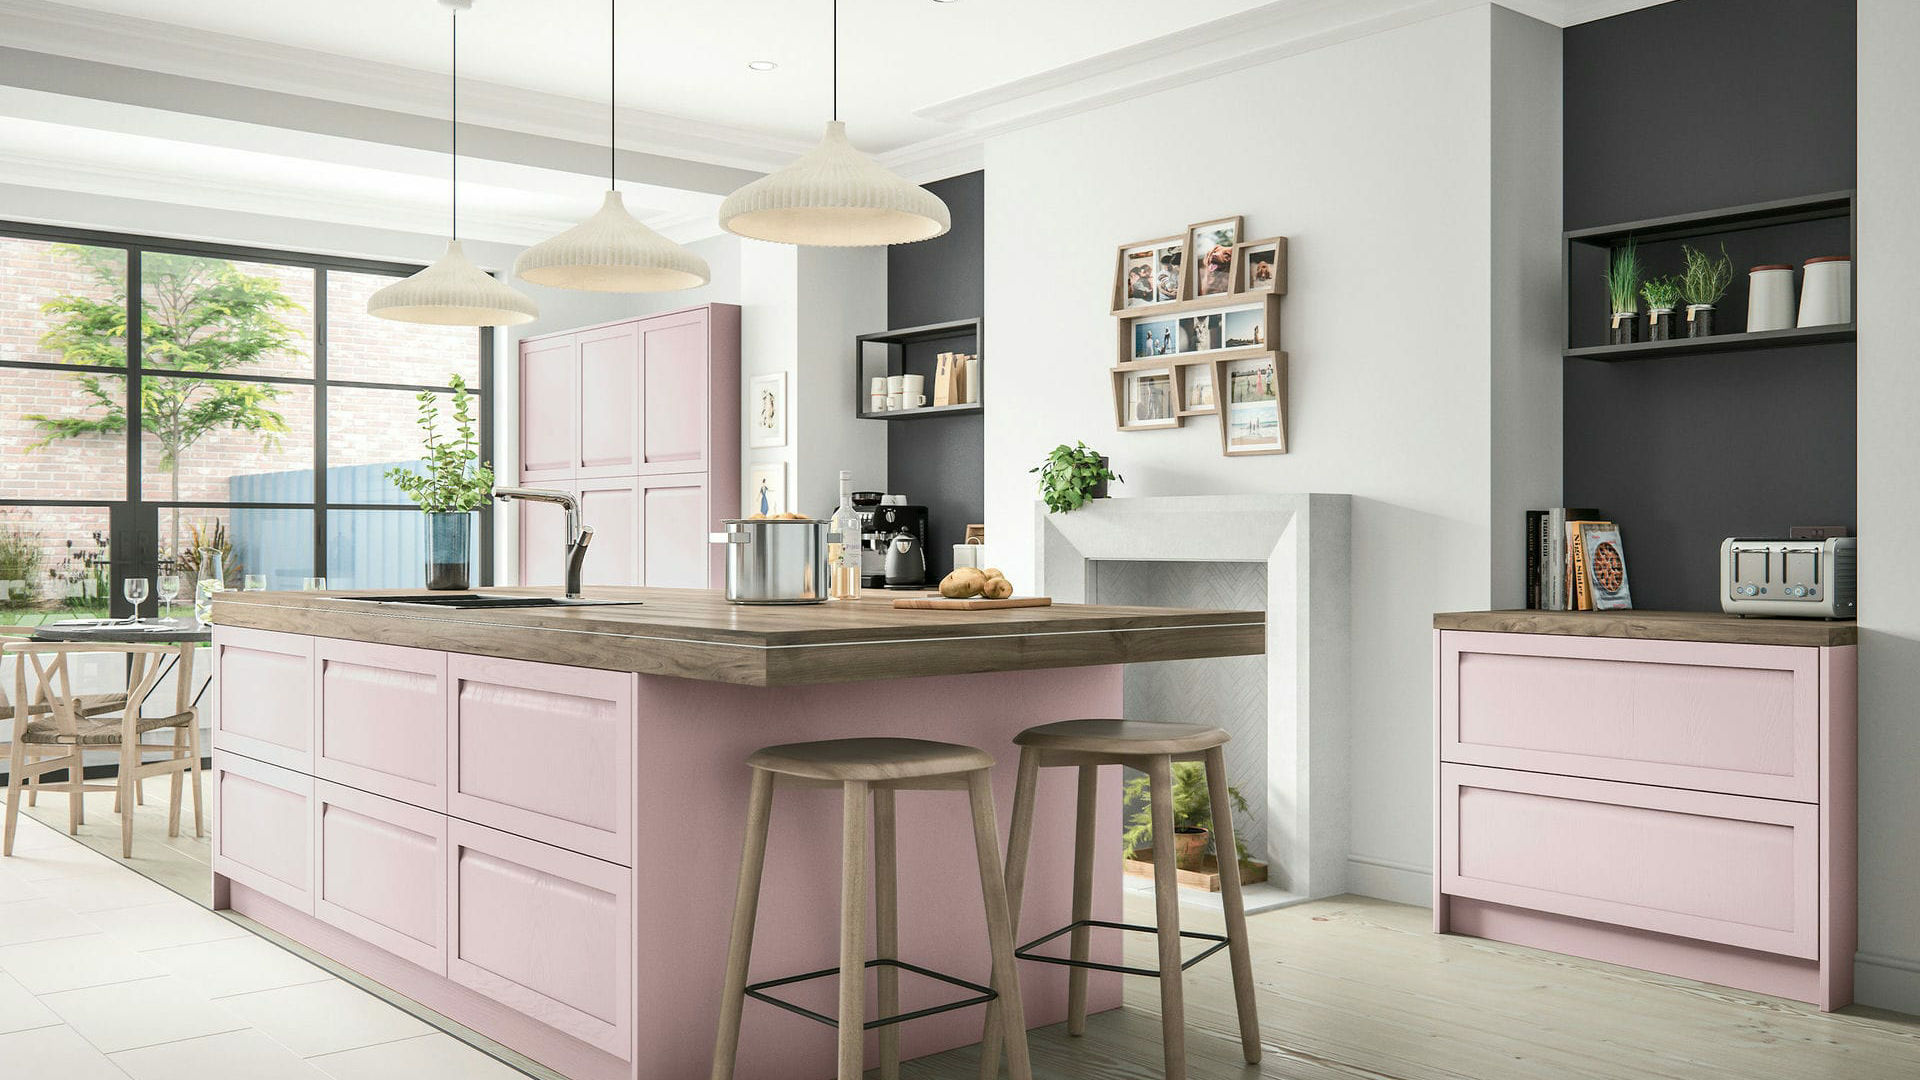 Handleless Solid Wood Vintage Pink kitchen featuring a smooth, contemporary design in a playful vintage pink finish